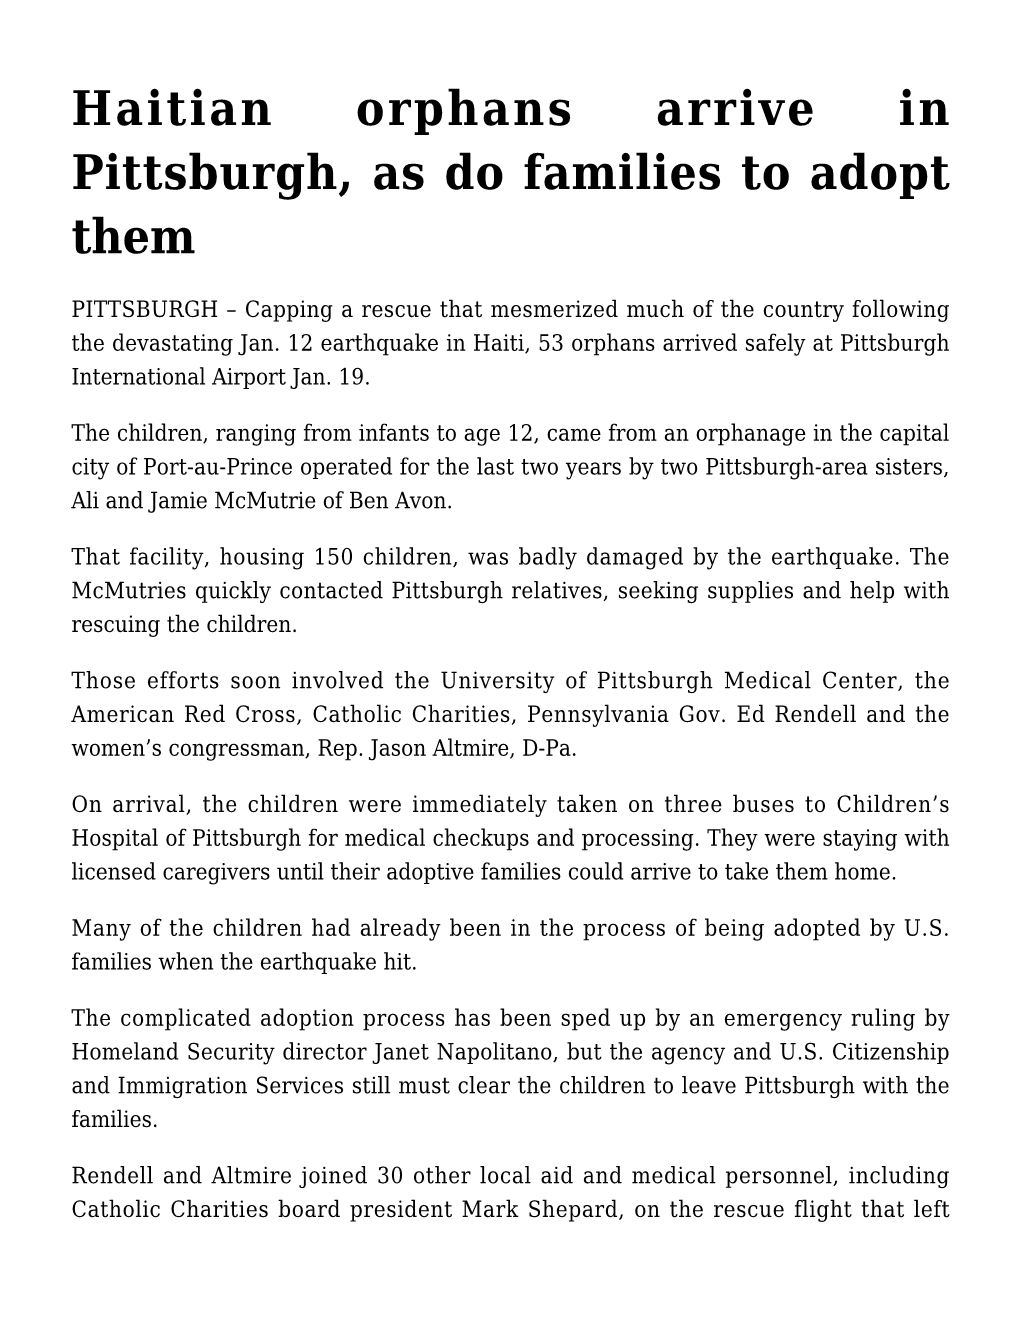 Haitian Orphans Arrive in Pittsburgh, As Do Families to Adopt Them